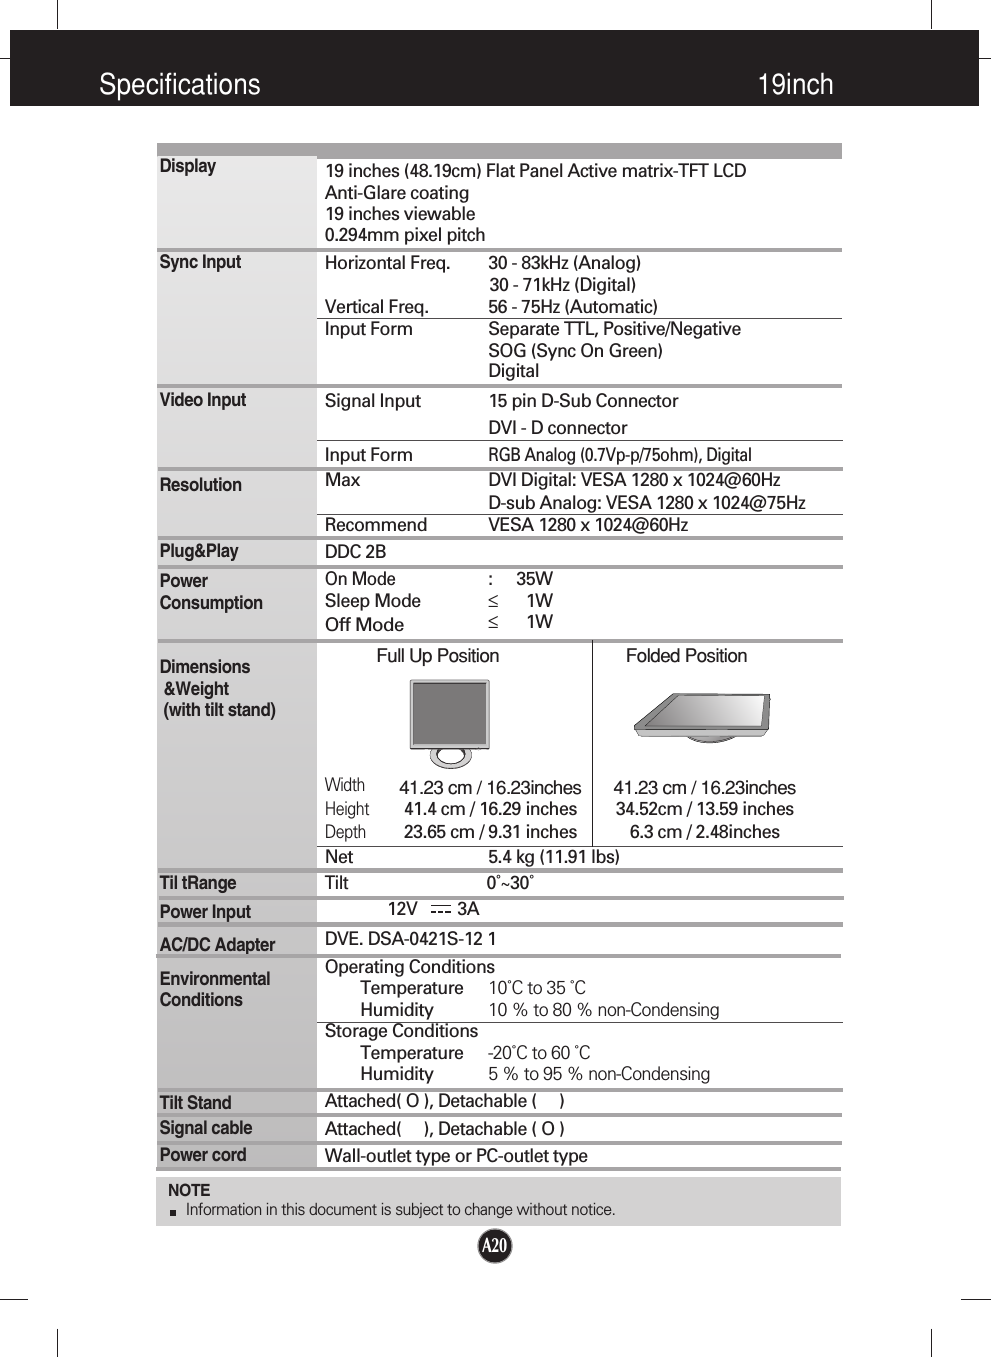 A20Specifications                                                                    19inchNOTEInformation in this document is subject to change without notice.19 inches (48.19cm) Flat Panel Active matrix-TFT LCD Anti-Glare coating19 inches viewable0.294mm pixel pitchHorizontal Freq. 30 - 83kHz (Analog)30 - 71kHz (Digital)Vertical Freq. 56 - 75Hz (Automatic)Input Form Separate TTL, Positive/NegativeSOG (Sync On Green) DigitalSignal Input 15 pin D-Sub ConnectorDVI - D connectorInput FormRGB Analog (0.7Vp-p/75ohm), DigitalMax DVI Digital: VESA 1280 x 1024@60Hz D-sub Analog: VESA 1280 x 1024@75HzRecommend VESA 1280 x 1024@60HzDDC 2BOn Mode :35WSleep Mode ≤1WOff Mode≤1WFull Up Position Folded PositionWidth41.23 cm / 16.23inches 41.23 cm / 16.23inchesHeight41.4 cm / 16.29 inches 34.52cm / 13.59 inchesDepth23.65 cm / 9.31 inches 6.3 cm / 2.48inchesNet 5.4 kg (11.91 lbs)Tilt0˚~30˚12V         3ADVE. DSA-0421S-12 1Operating ConditionsTemperature 10˚C to 35 ˚CHumidity 10 % to 80 % non-CondensingStorage ConditionsTemperature -20˚C to 60 ˚CHumidity 5 % to 95 % non-CondensingAttached( O ), Detachable (     )Attached(     ), Detachable ( O )Wall-outlet type or PC-outlet typeDisplaySync InputVideo InputResolutionPlug&amp;PlayPowerConsumptionDimensions&amp;Weight(with tilt stand)Til tRangePower InputAC/DC AdapterEnvironmentalConditionsTilt StandSignal cablePower cord